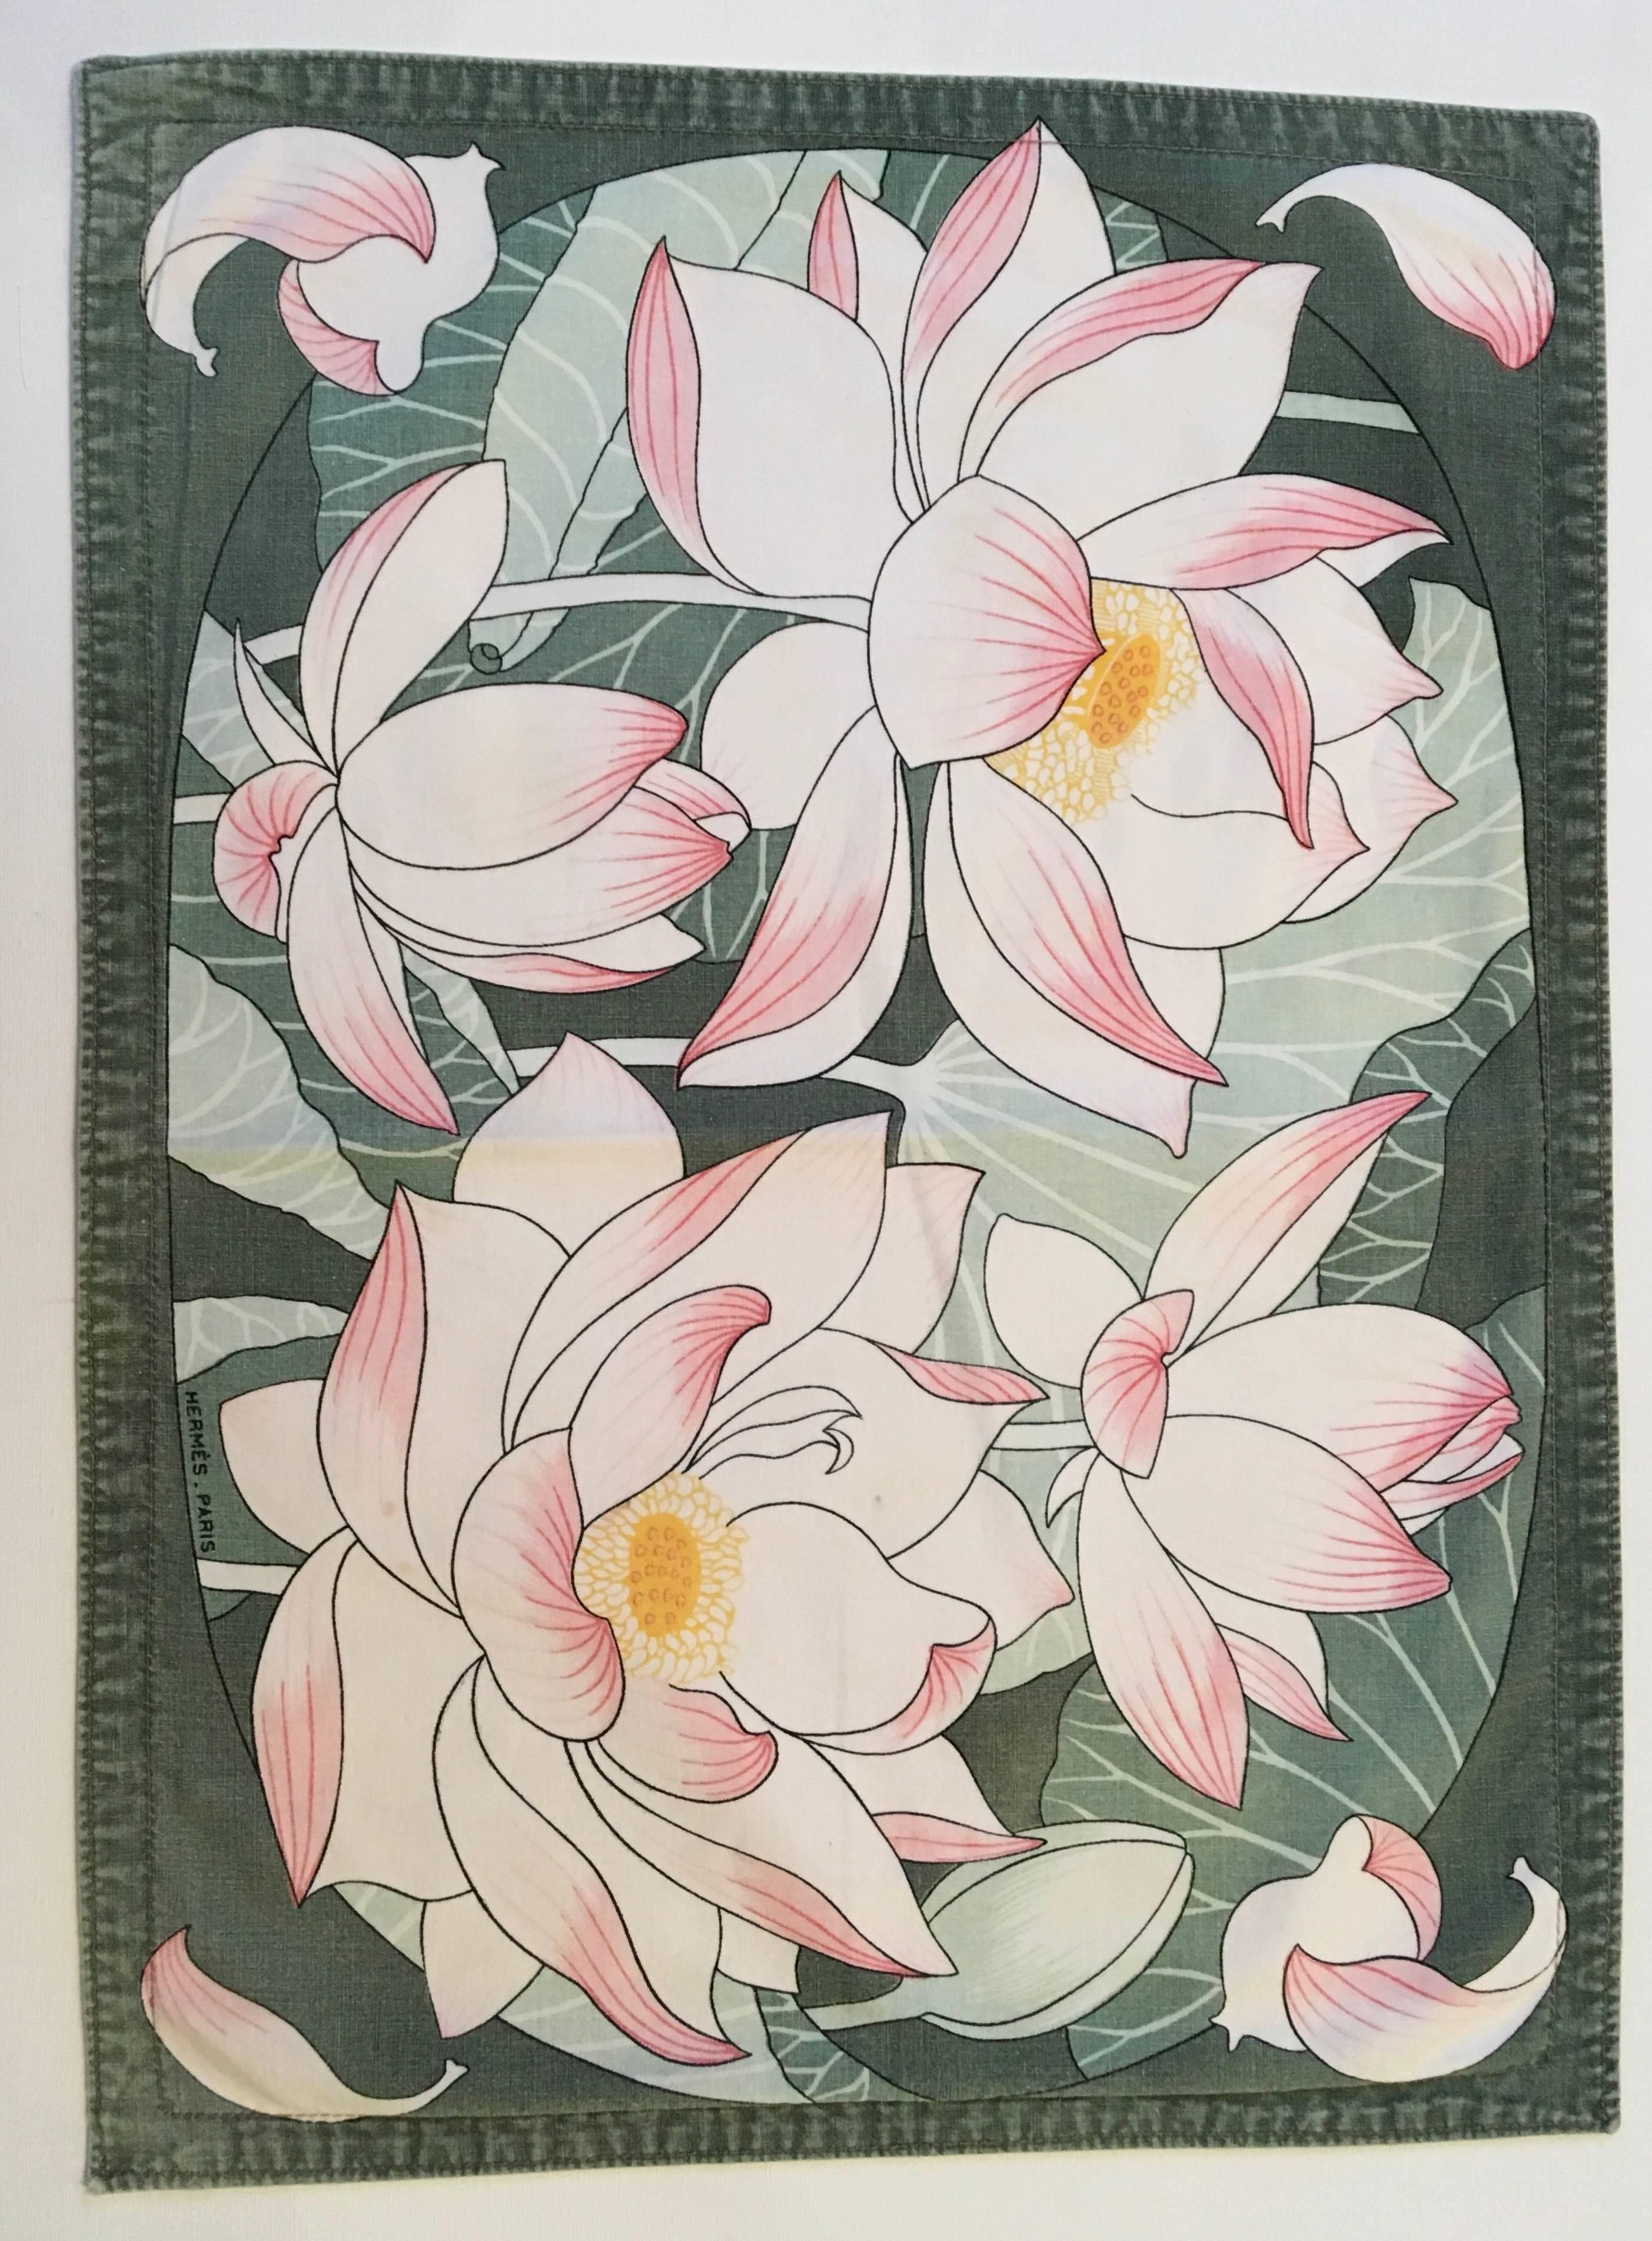 Presented here is a set of 4 Hermes placemats. These mats are made from 100% cotton. Each placemat is a floral print and each mat is the same design. The print is comprised of shades of colors of pink, white, green, and yellow. The beautiful